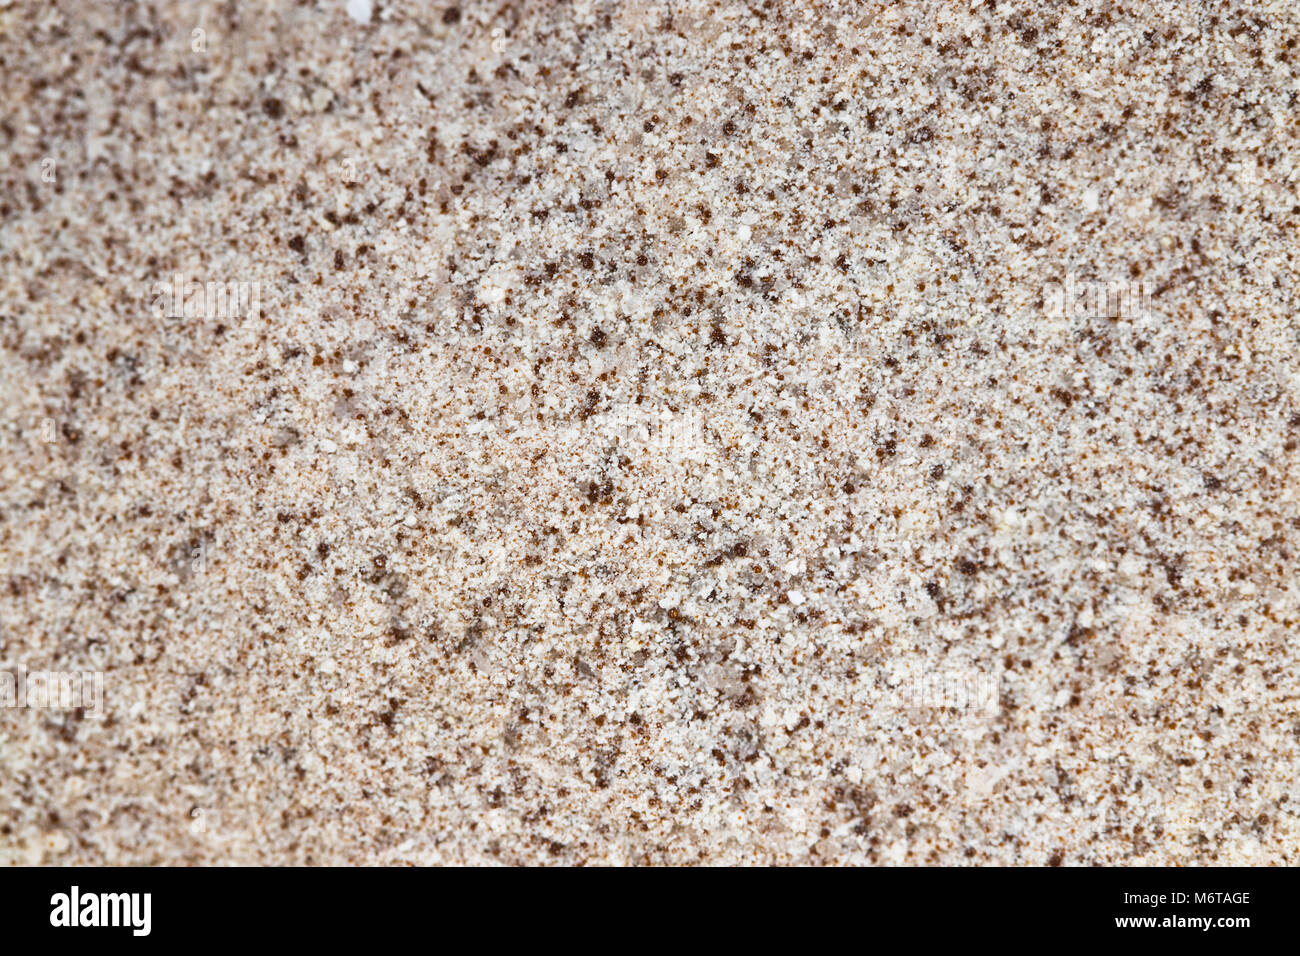 White Noise Gritty Sandy Grunge Textured Abstract Background. Stock Photo